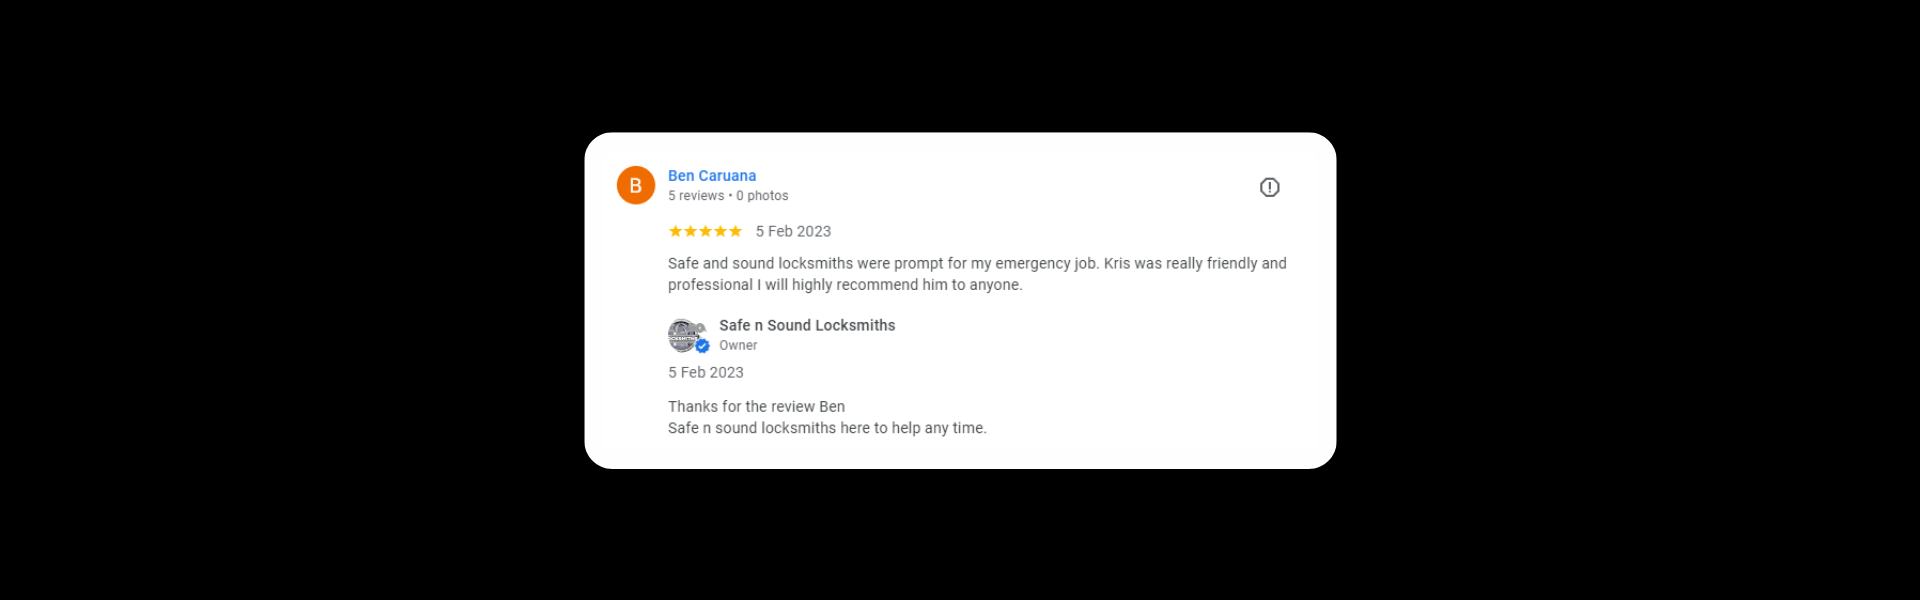 Ben Caruana 5 reviews a year ago Safe and sound locksmiths were prompt for my emergency job. Kris was really friendly and professional I will highly recommend him to anyone. Response from the owner a year ago Thanks for the review Ben Safe n sound locksmiths here to help any time.